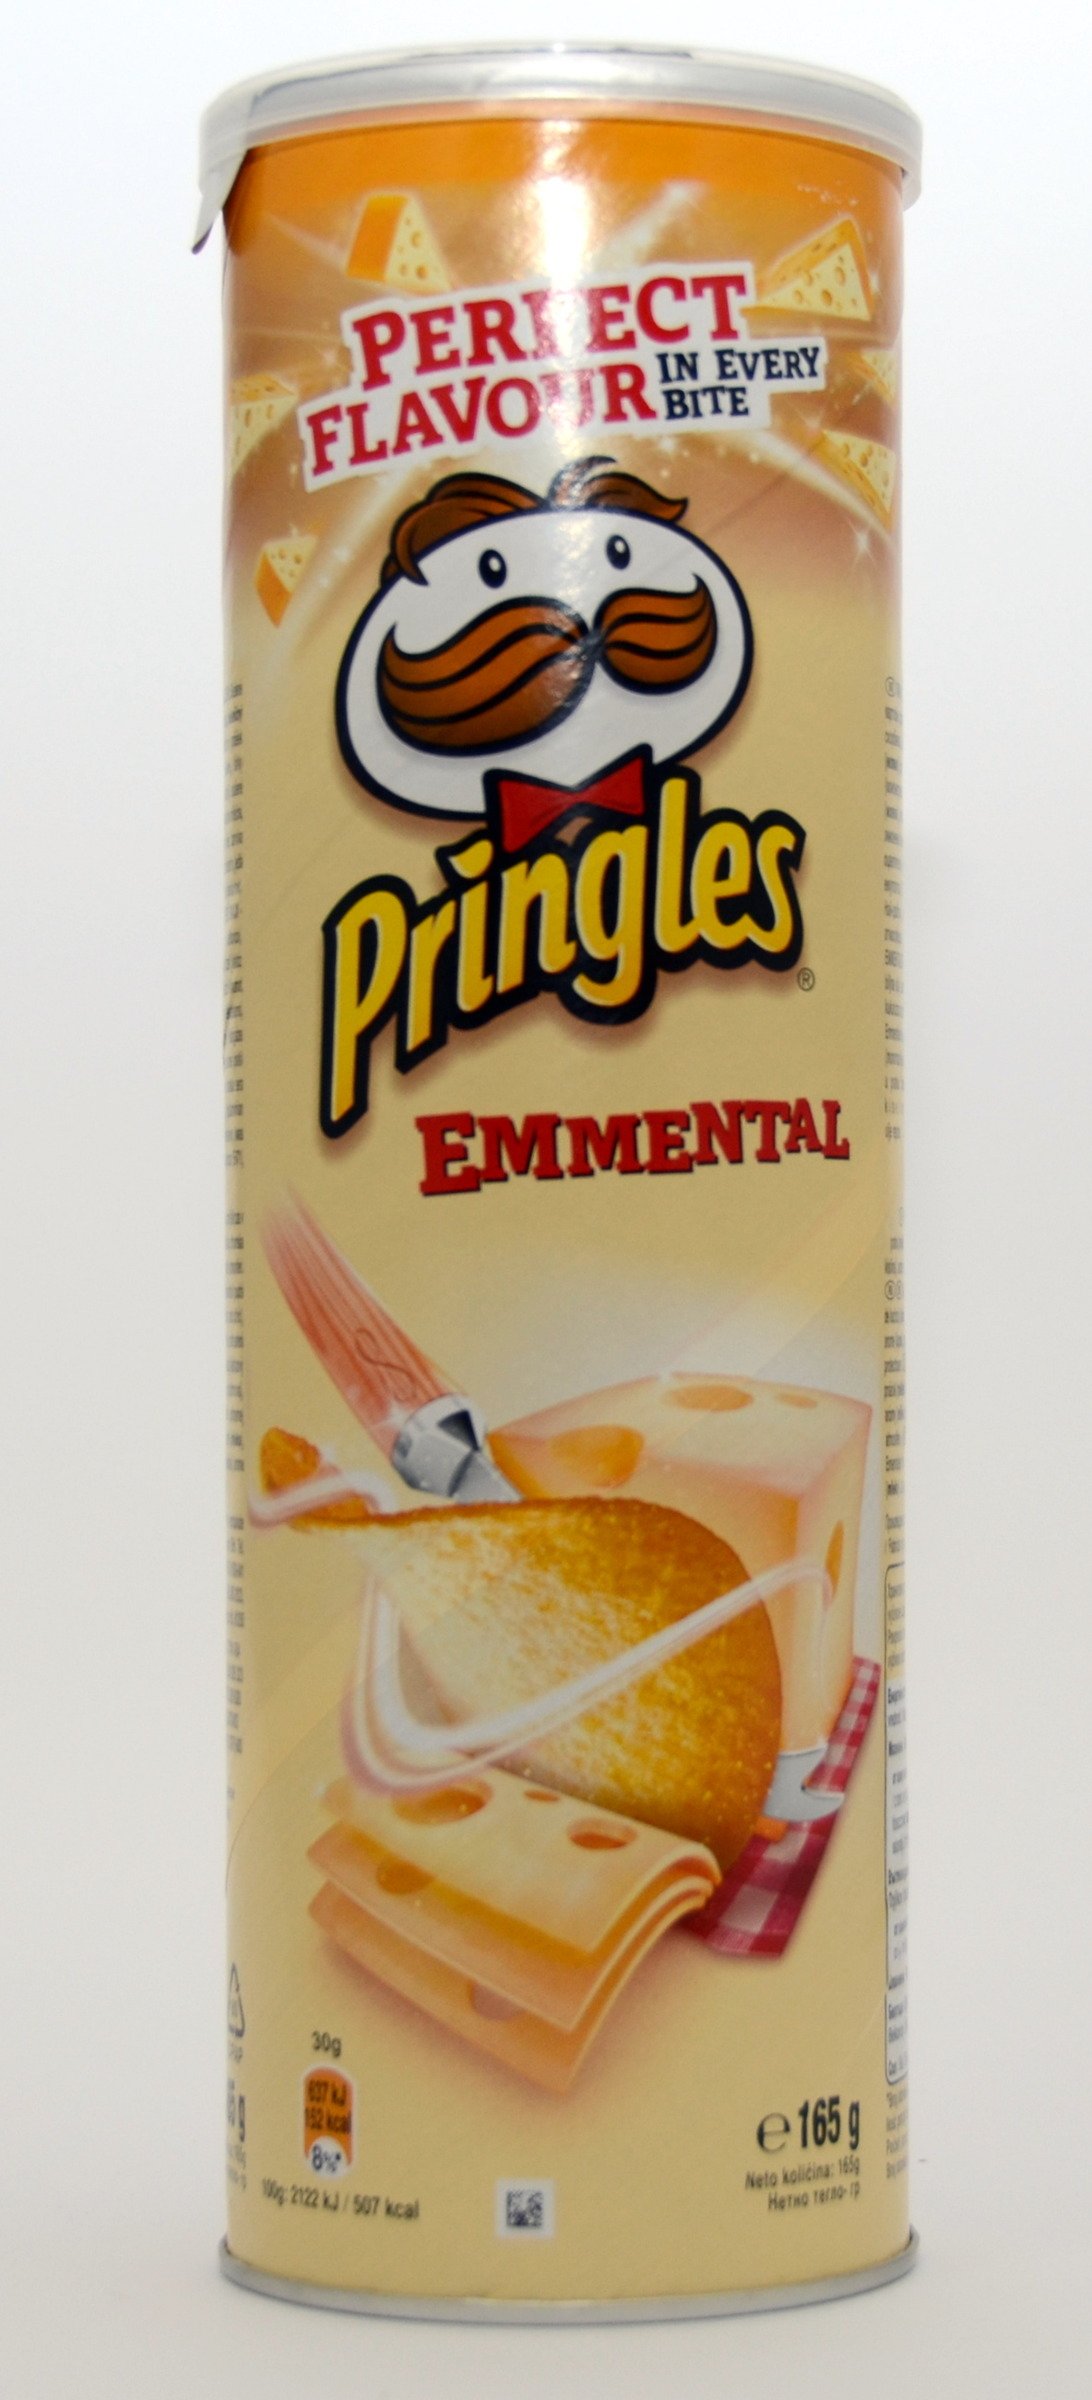 Pringles Cheesy Cheese 165 G Grocery Crisps And Snacks Offer Brands Pringles Offer Grocery Crisps And Snacks Markowe Perfumy I Kosmetyki,How To Get Rid Of Black Ants At Home